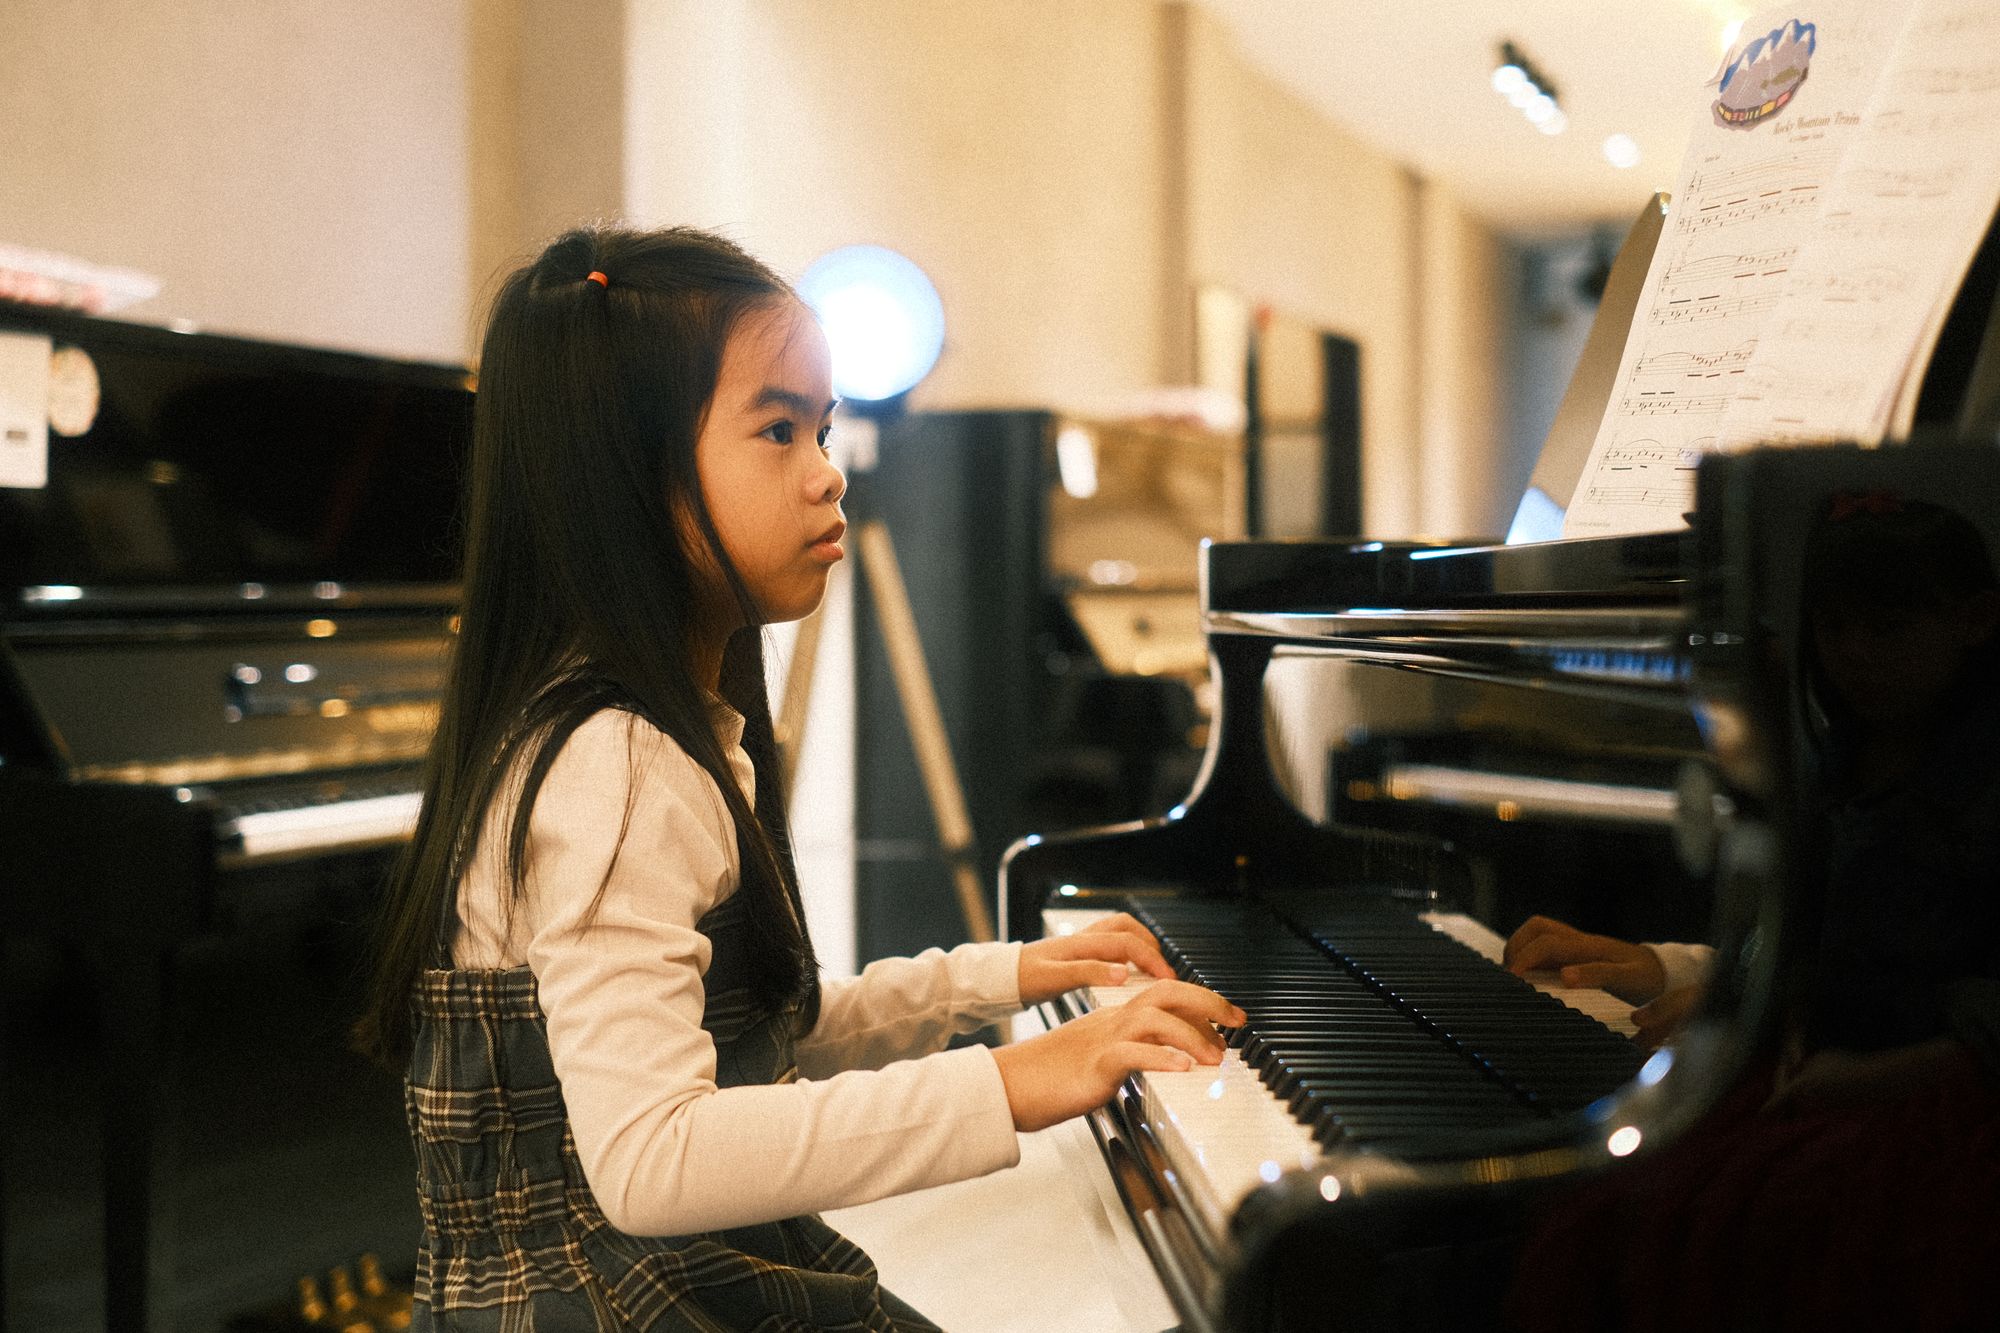 At What Age Should a Child Learn a Musical Instrument?